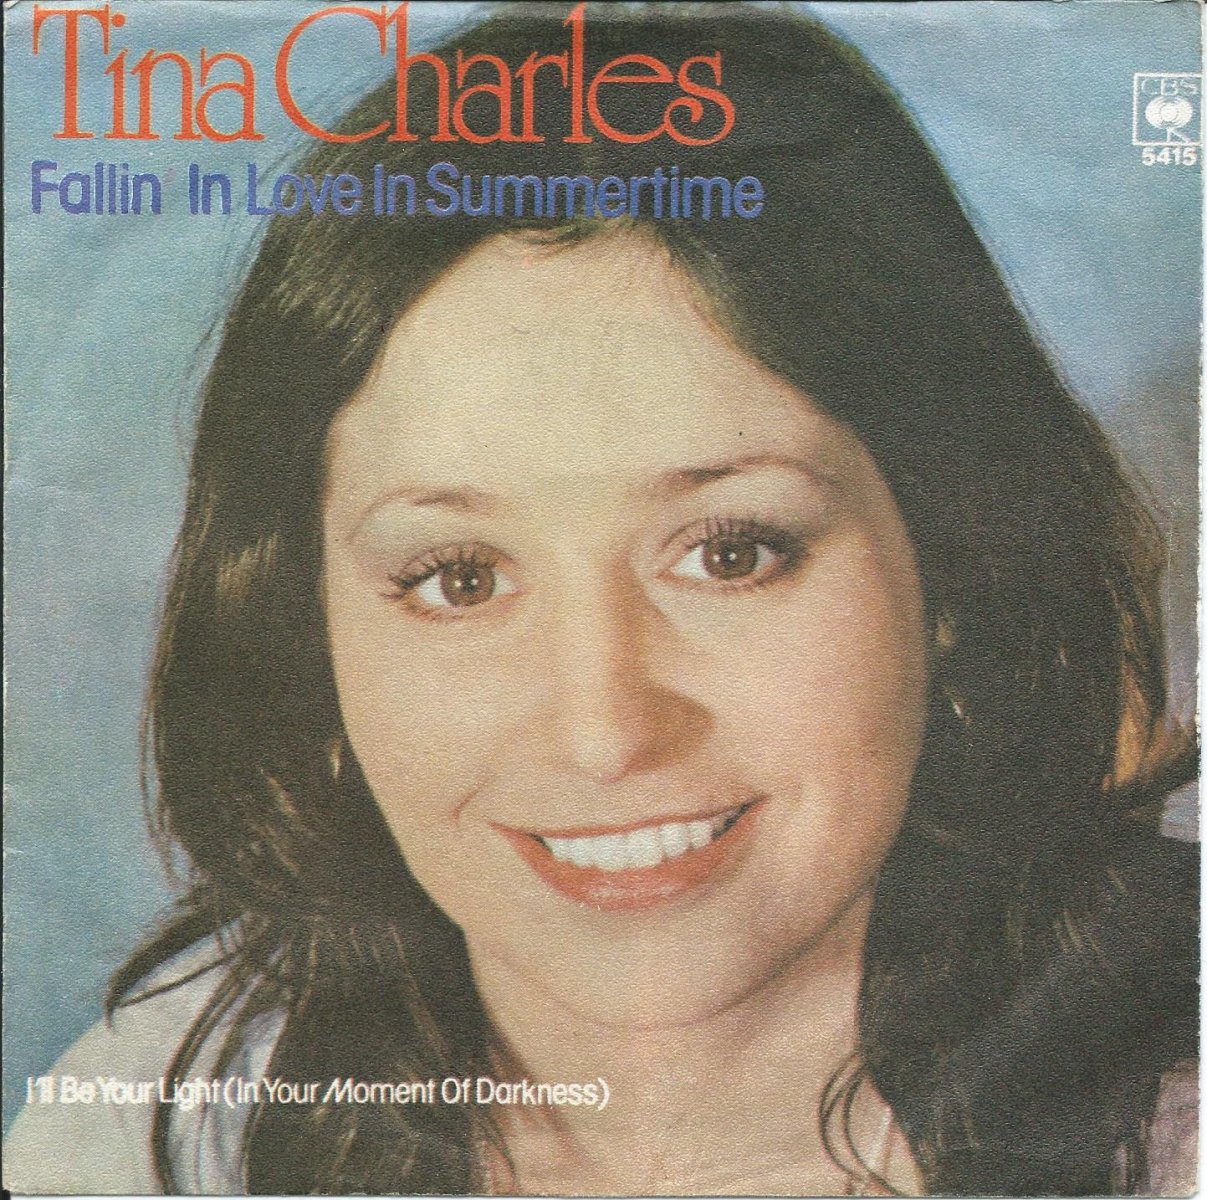 TINA CHARLES / FALLIN' IN LOVE IN SUMMERTIME / I'LL BE YOUR LIGHT (IN YOUR MOMENT OF DARKNESS) (7